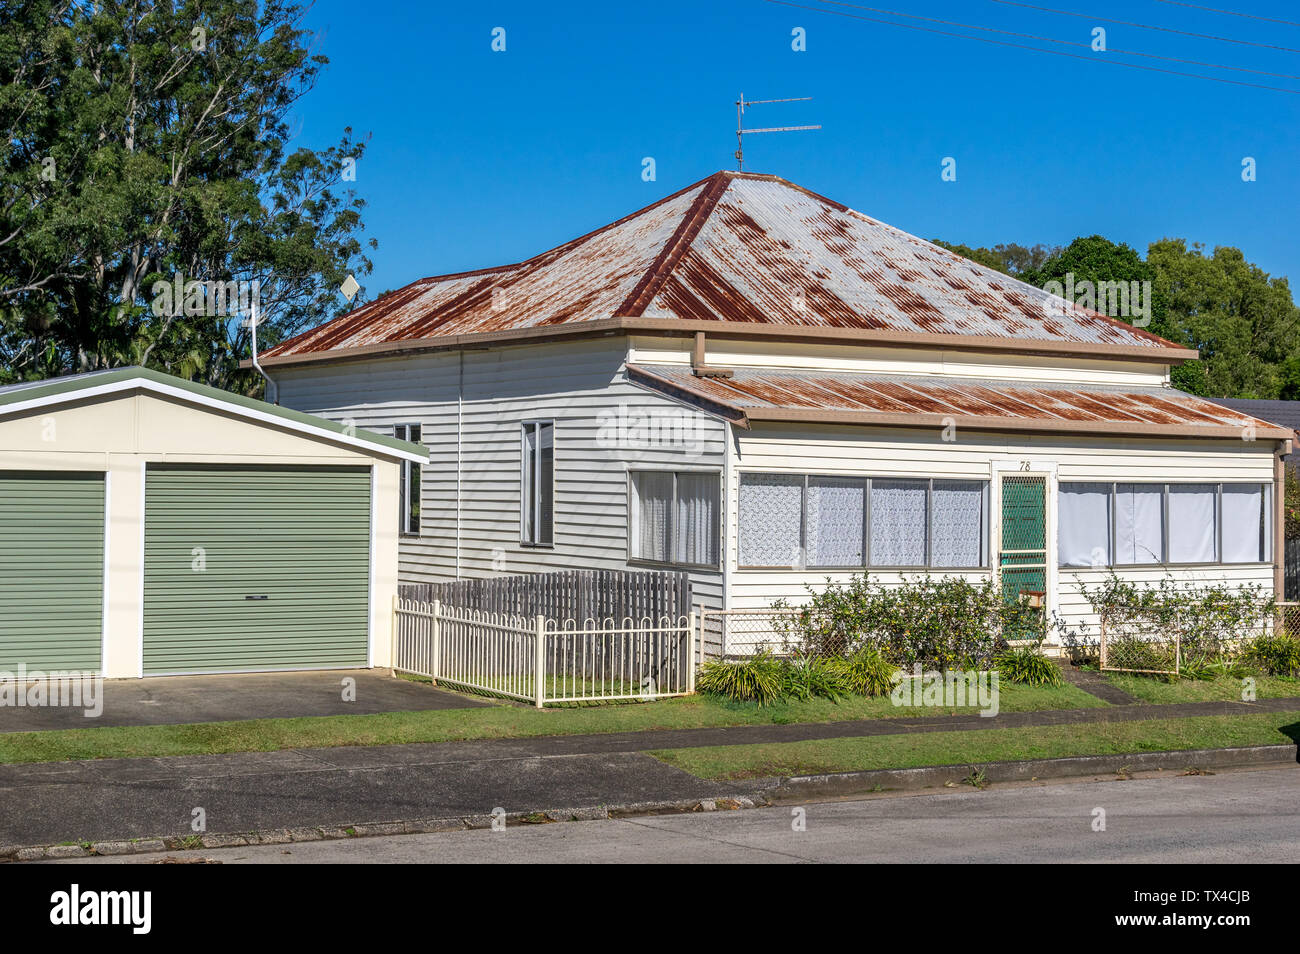 Old Australian house with wooden sidings and iron roof Stock Photo